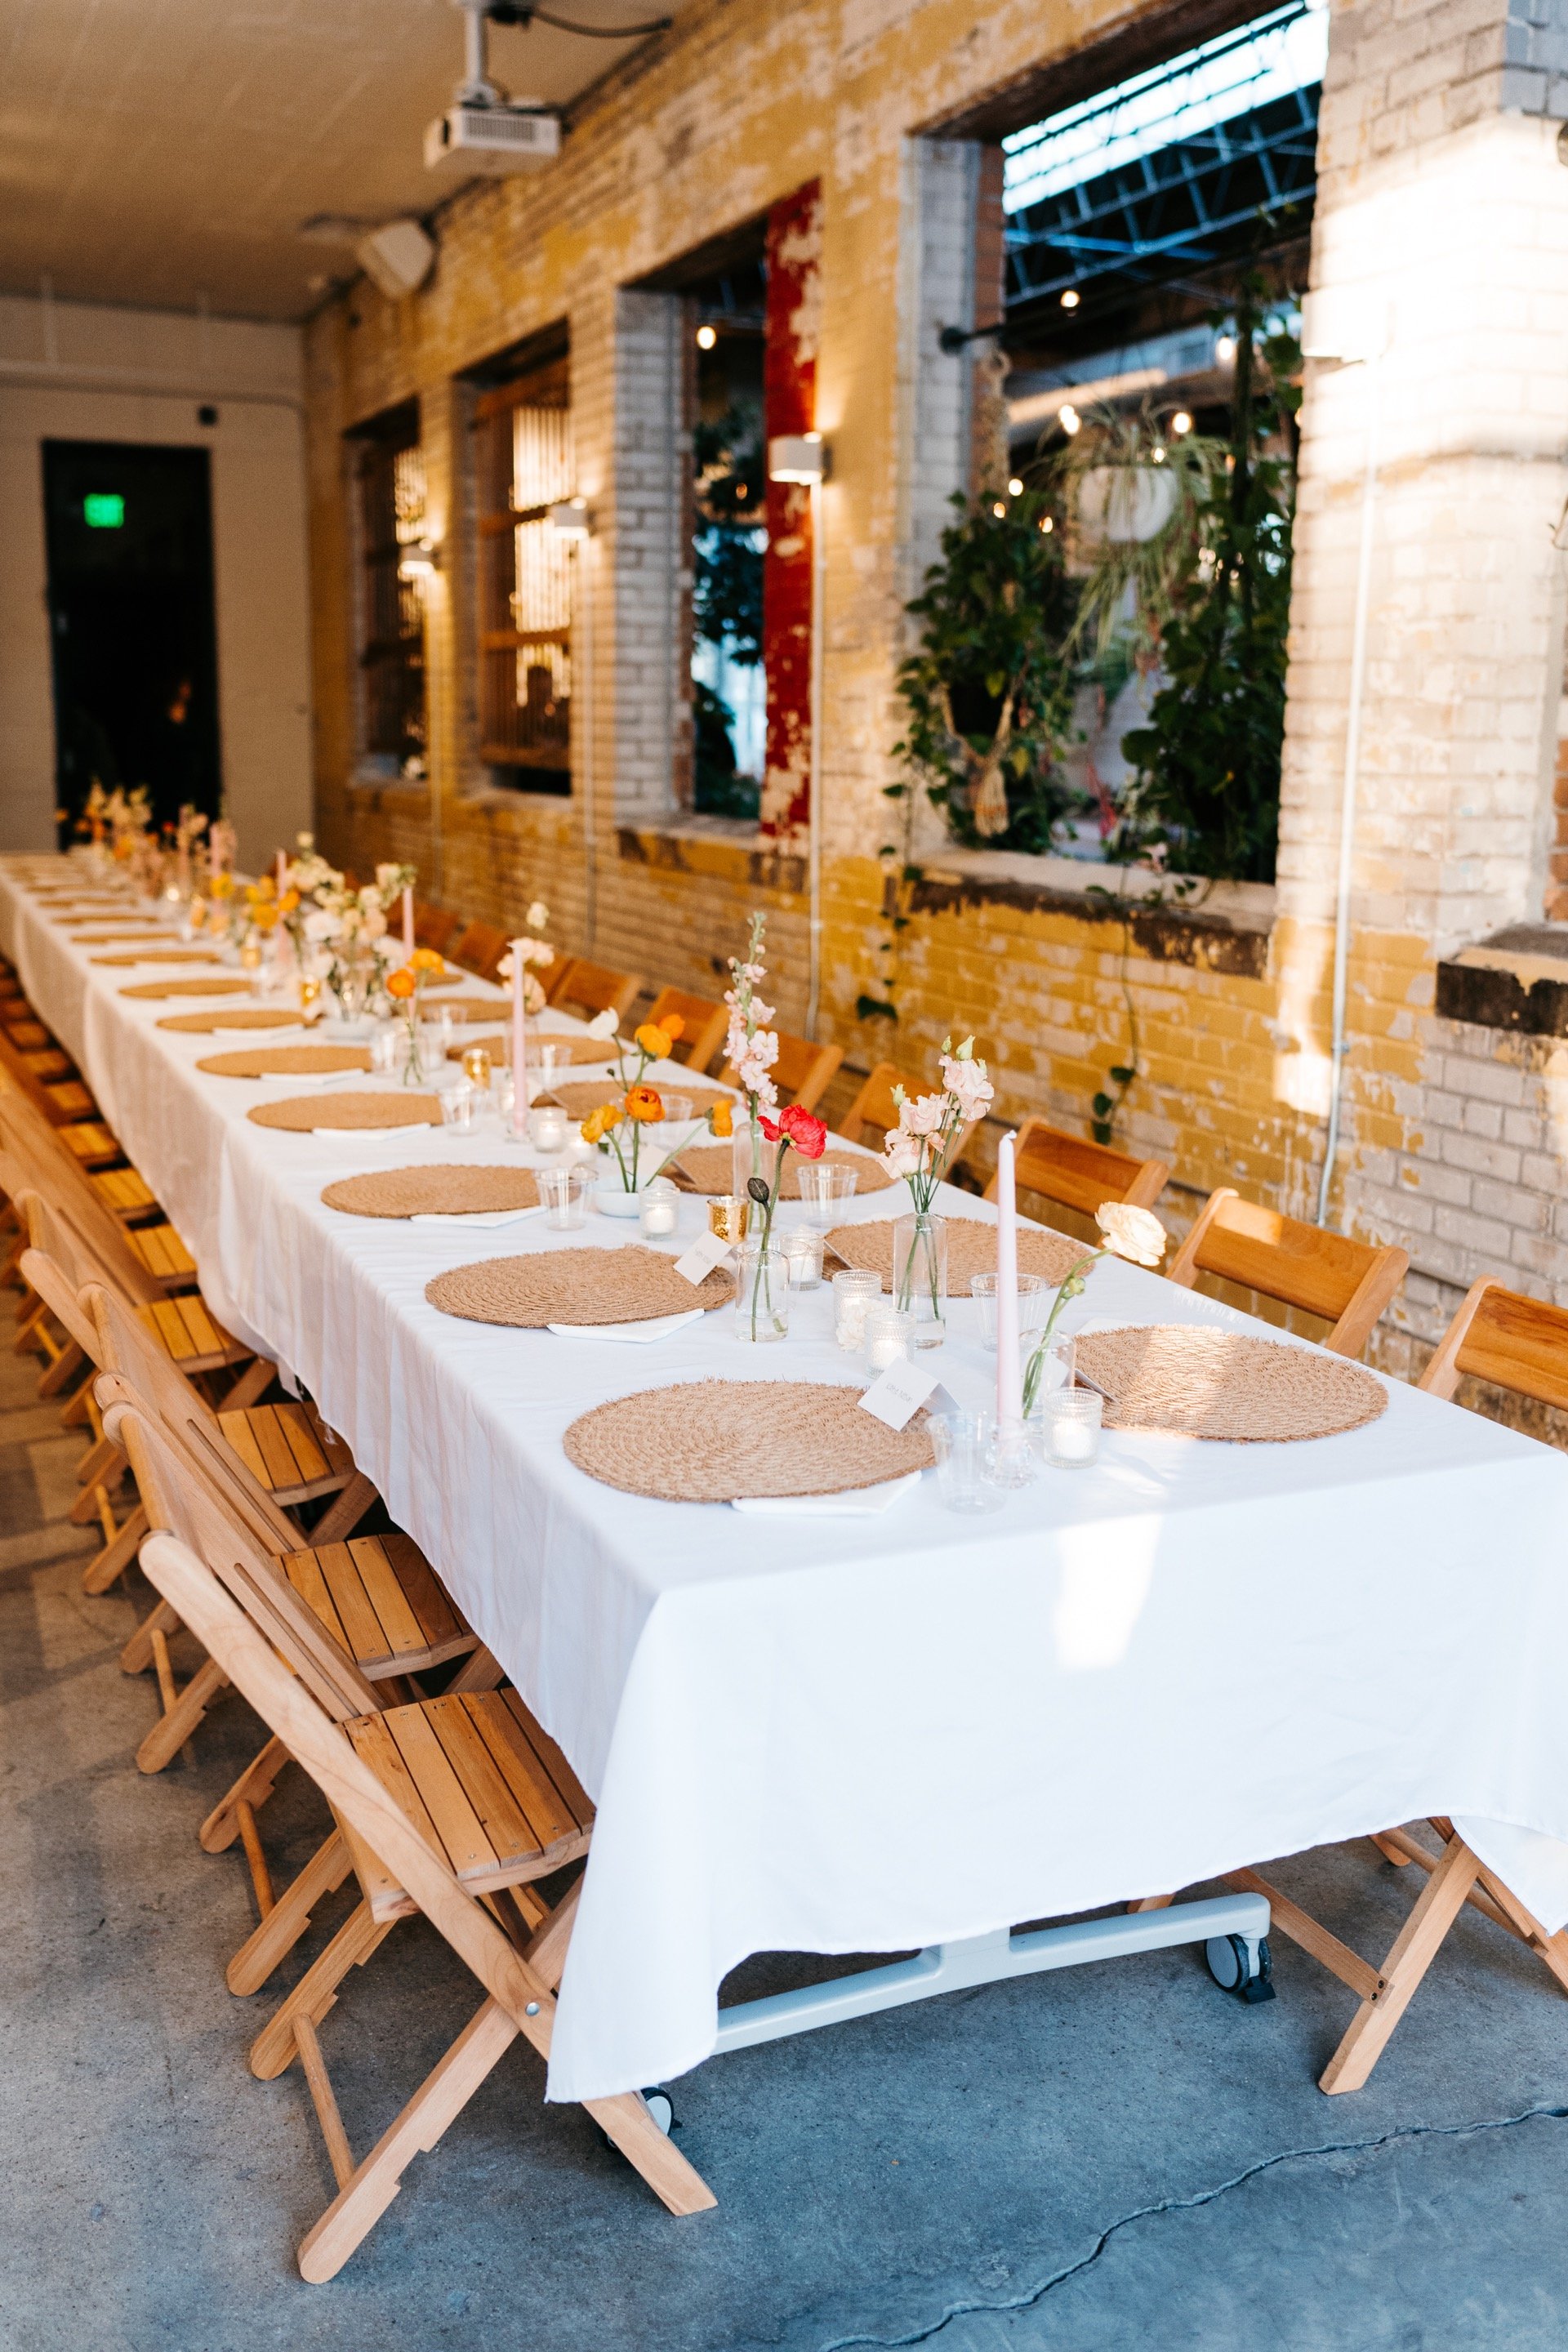 Colorful Winter Wedding at The Annex with Allison Hopperstad